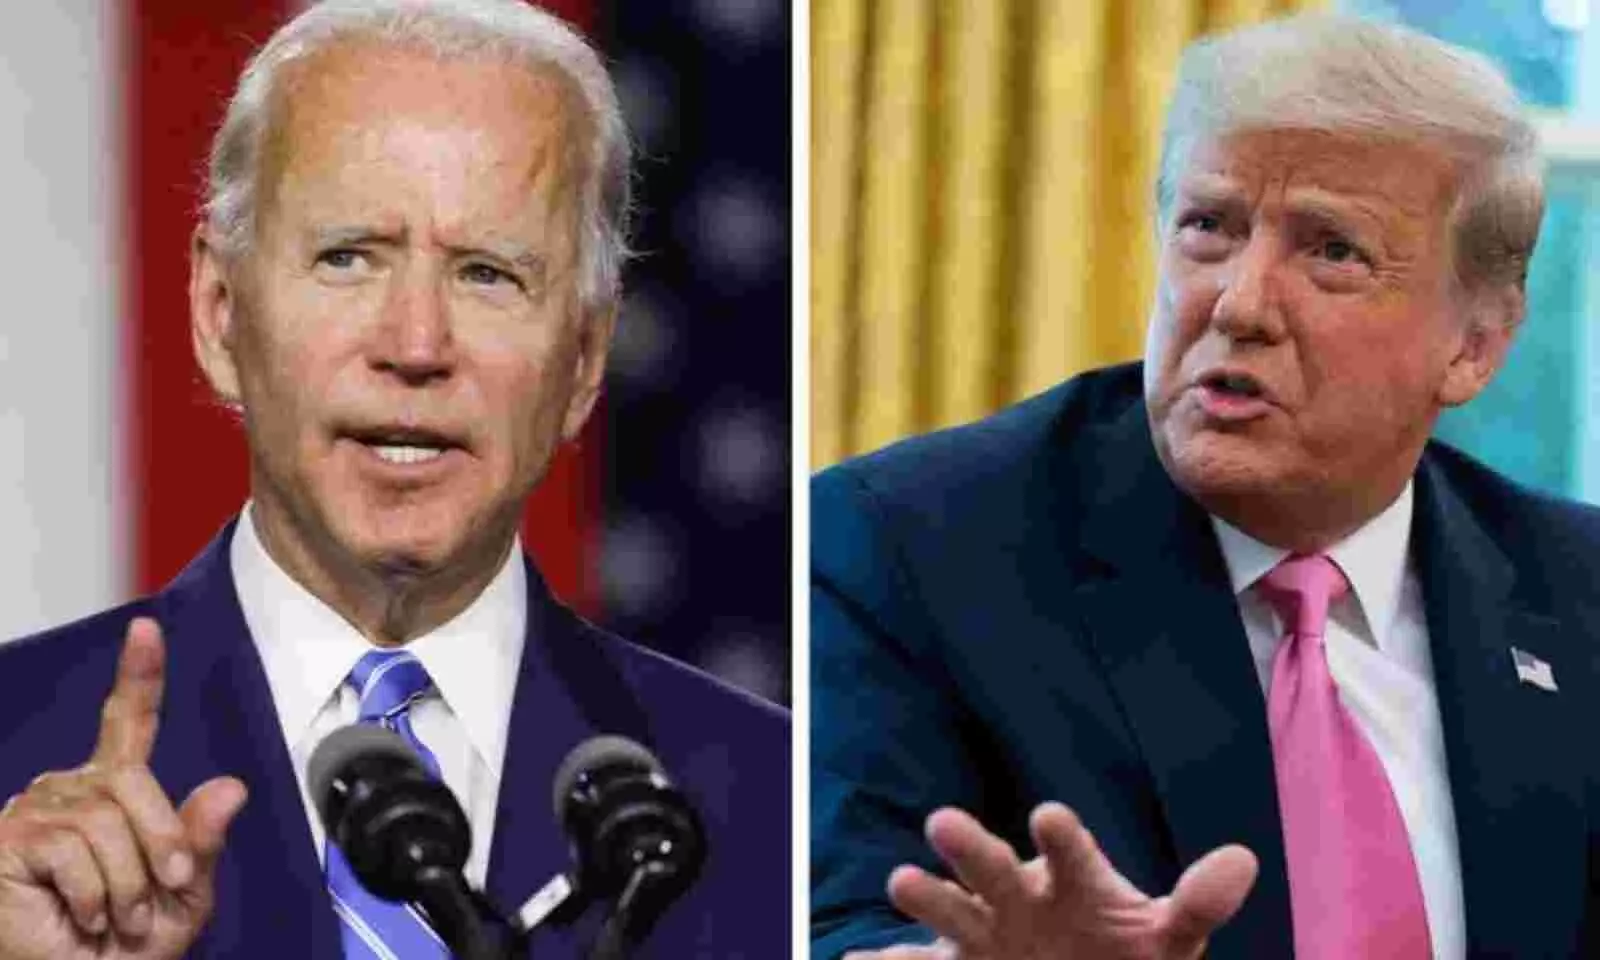 Bidens national lead against Trump narrows to 4 points,says a new poll